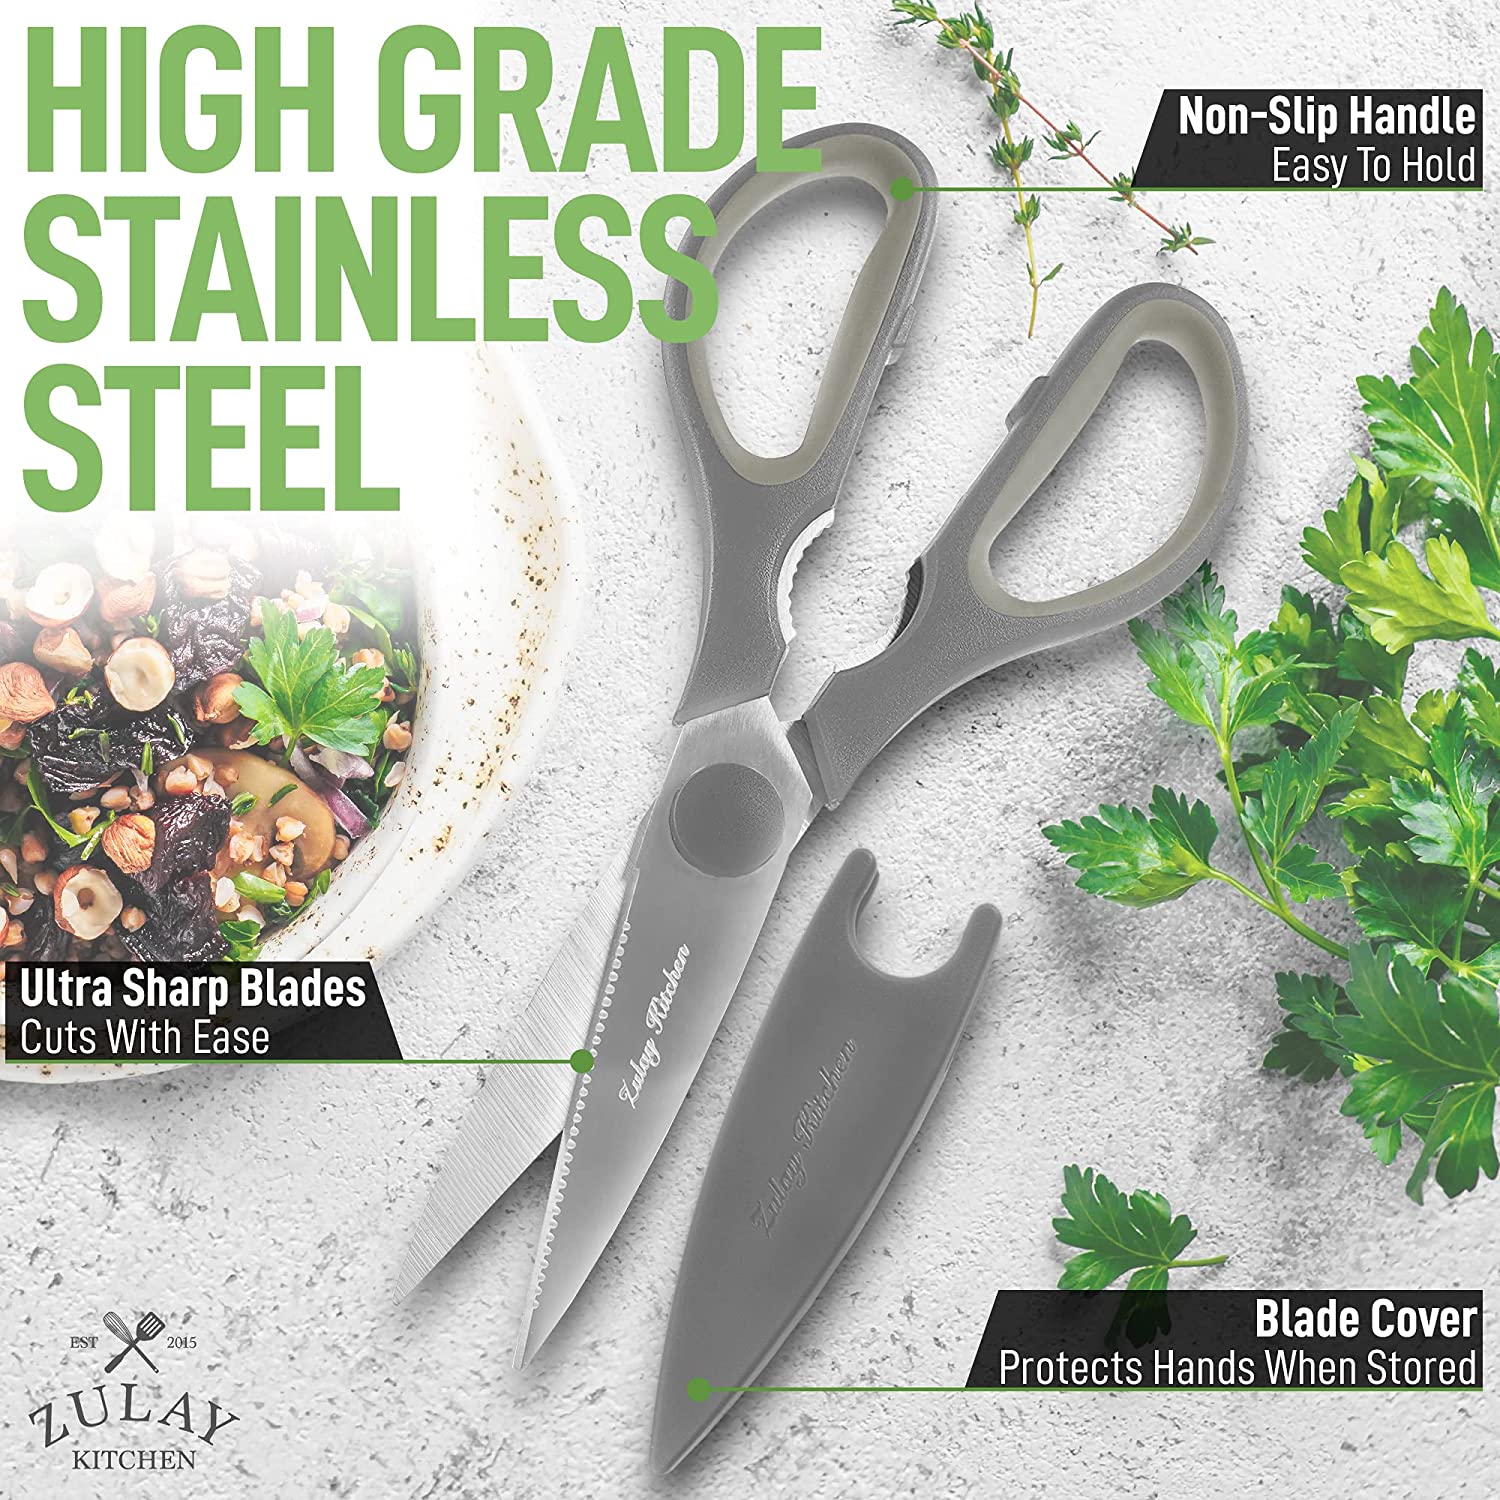 Stainless Steel Kitchen Shears With Protective Cover - Zulay KitchenZulay Kitchen